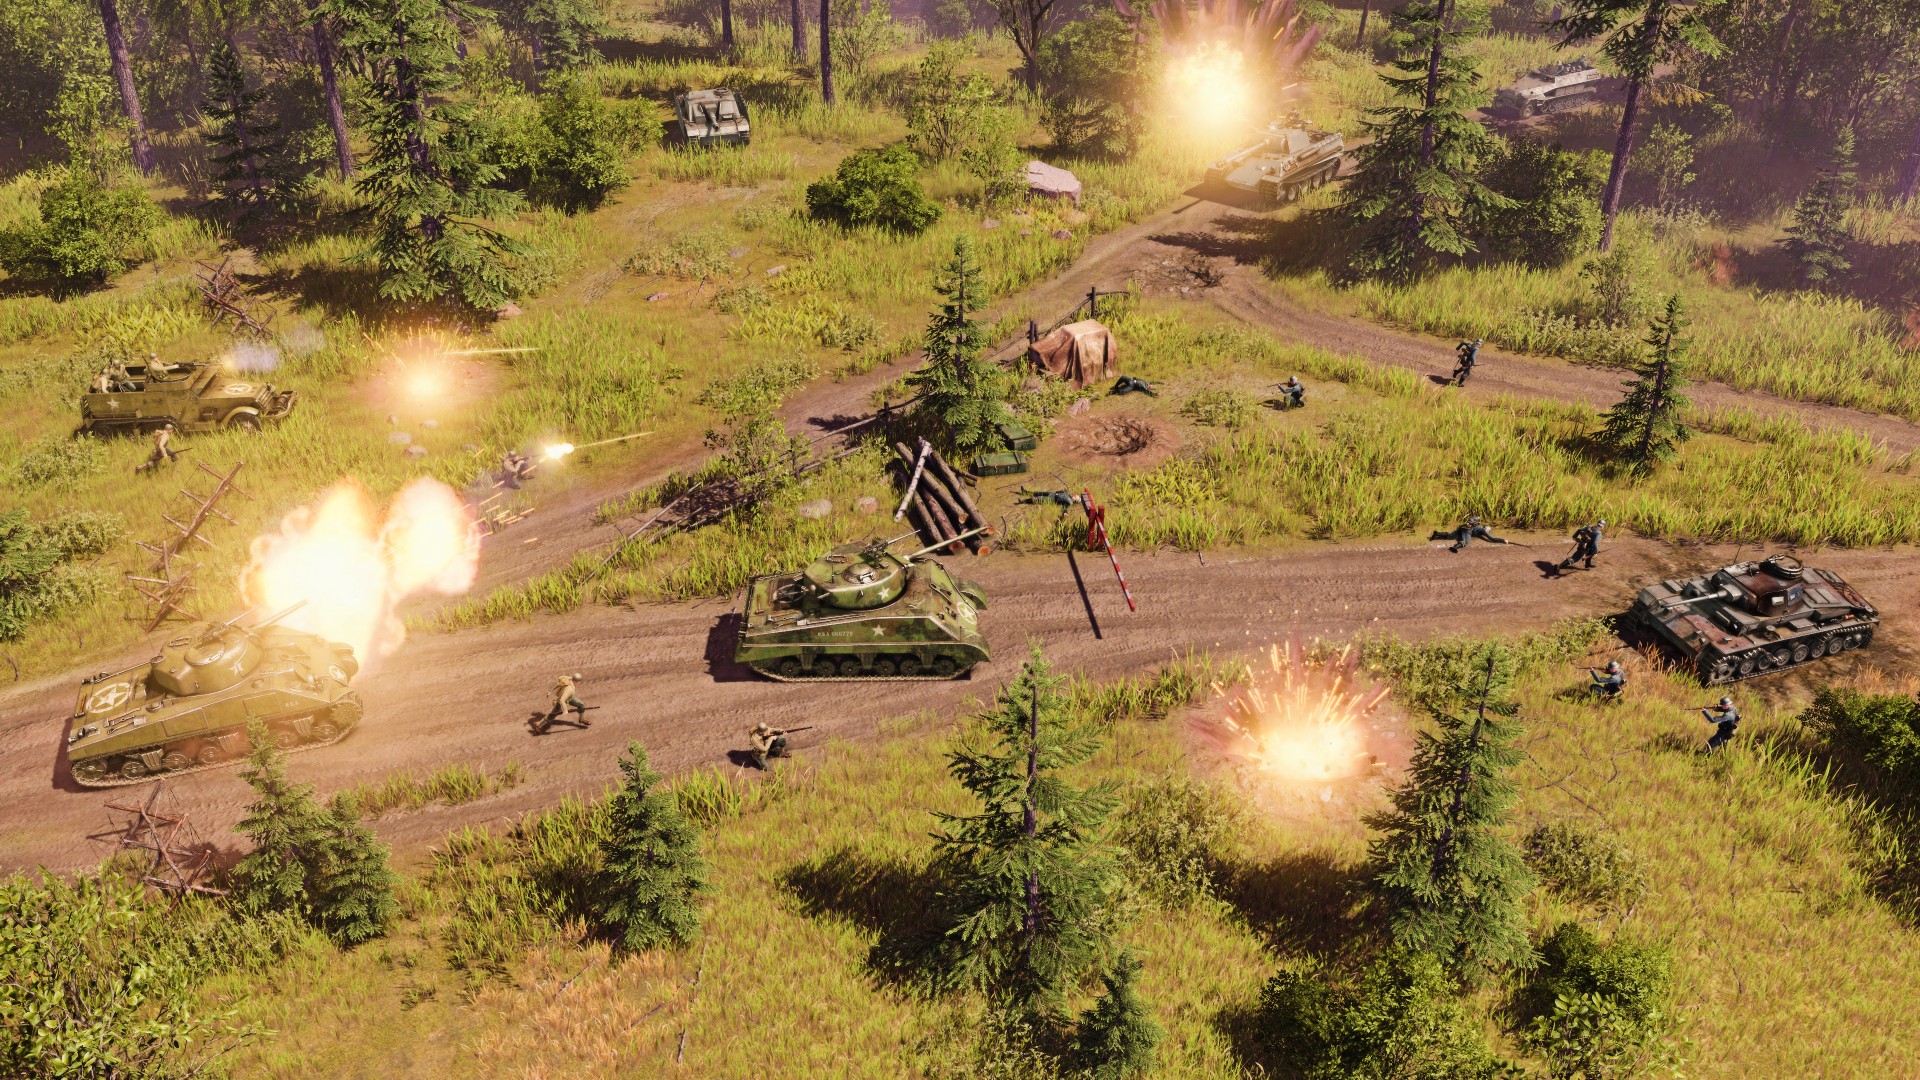 WW2 RTS game Men of War II will bring an excellent series back to life